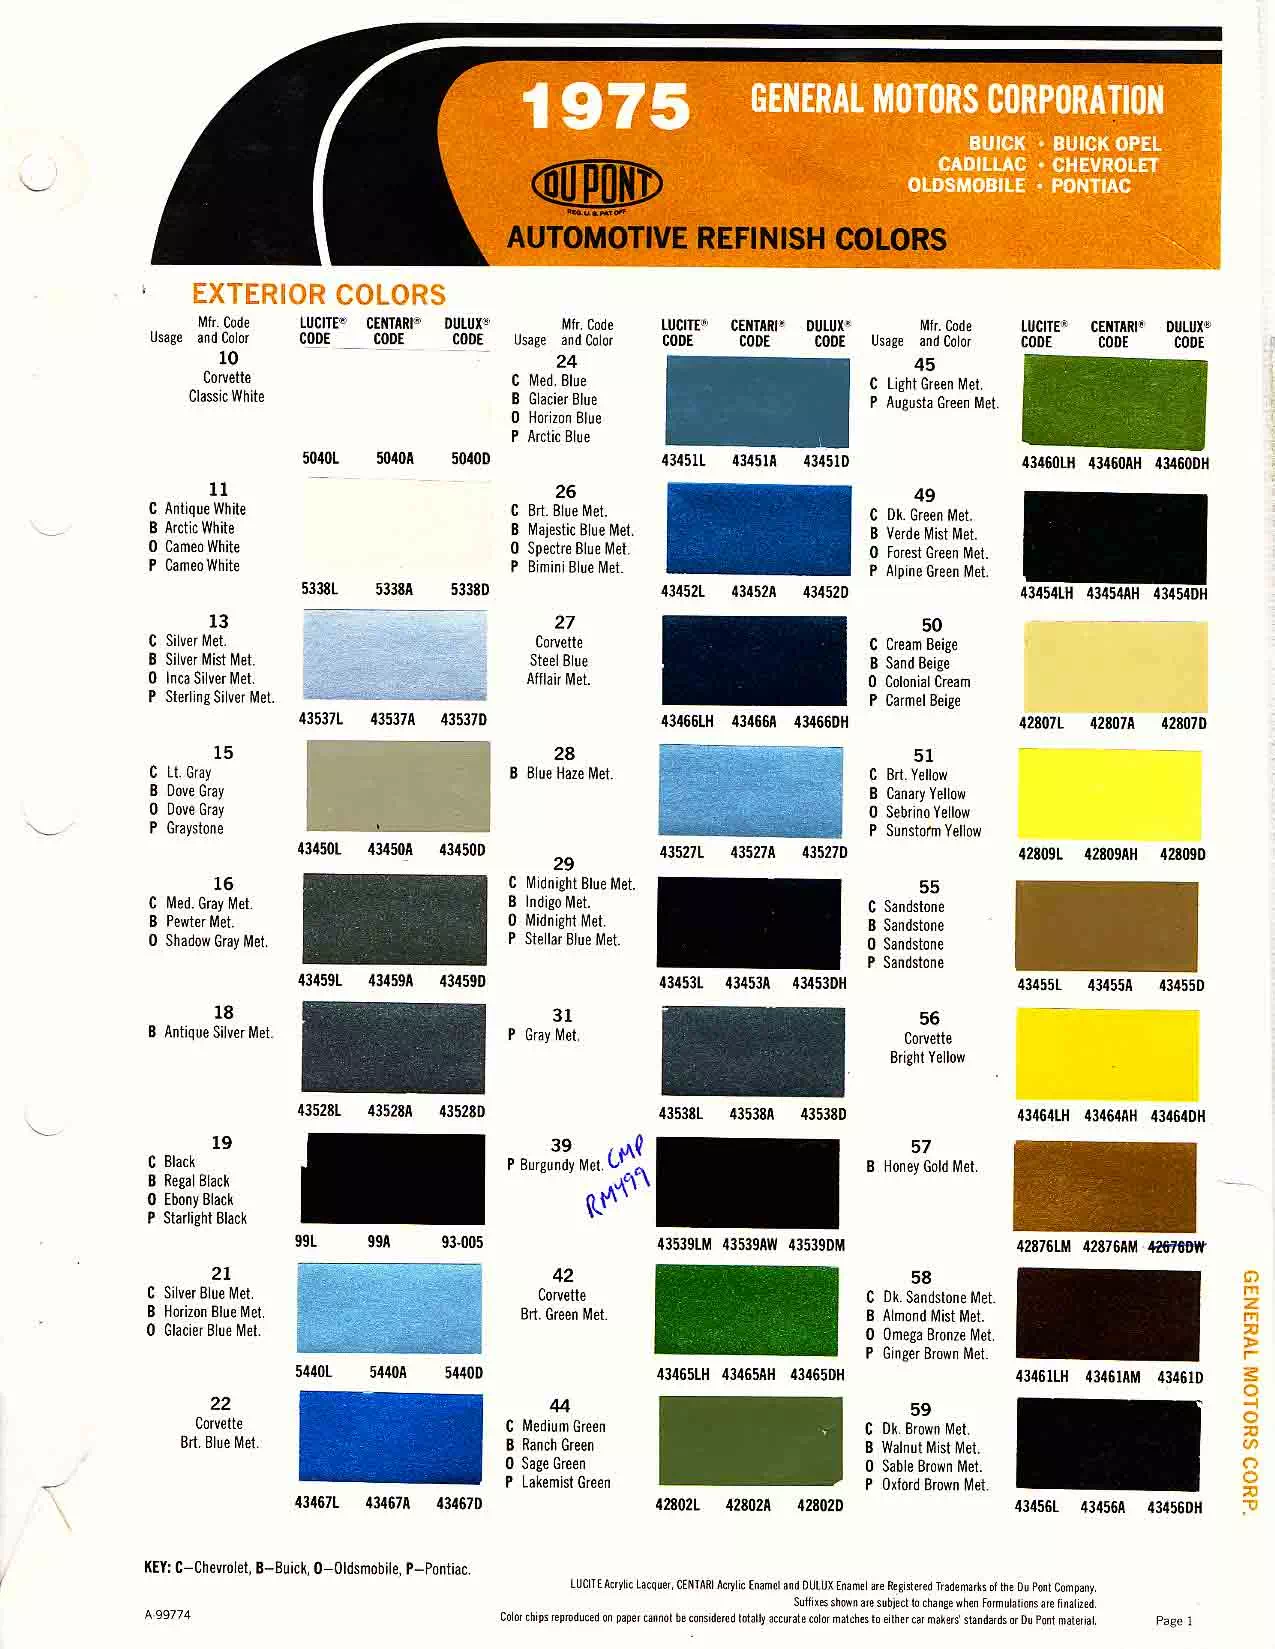 Colors, Descriptions, Codes, and Paint Swatches for General Motors Vehicles in 1975